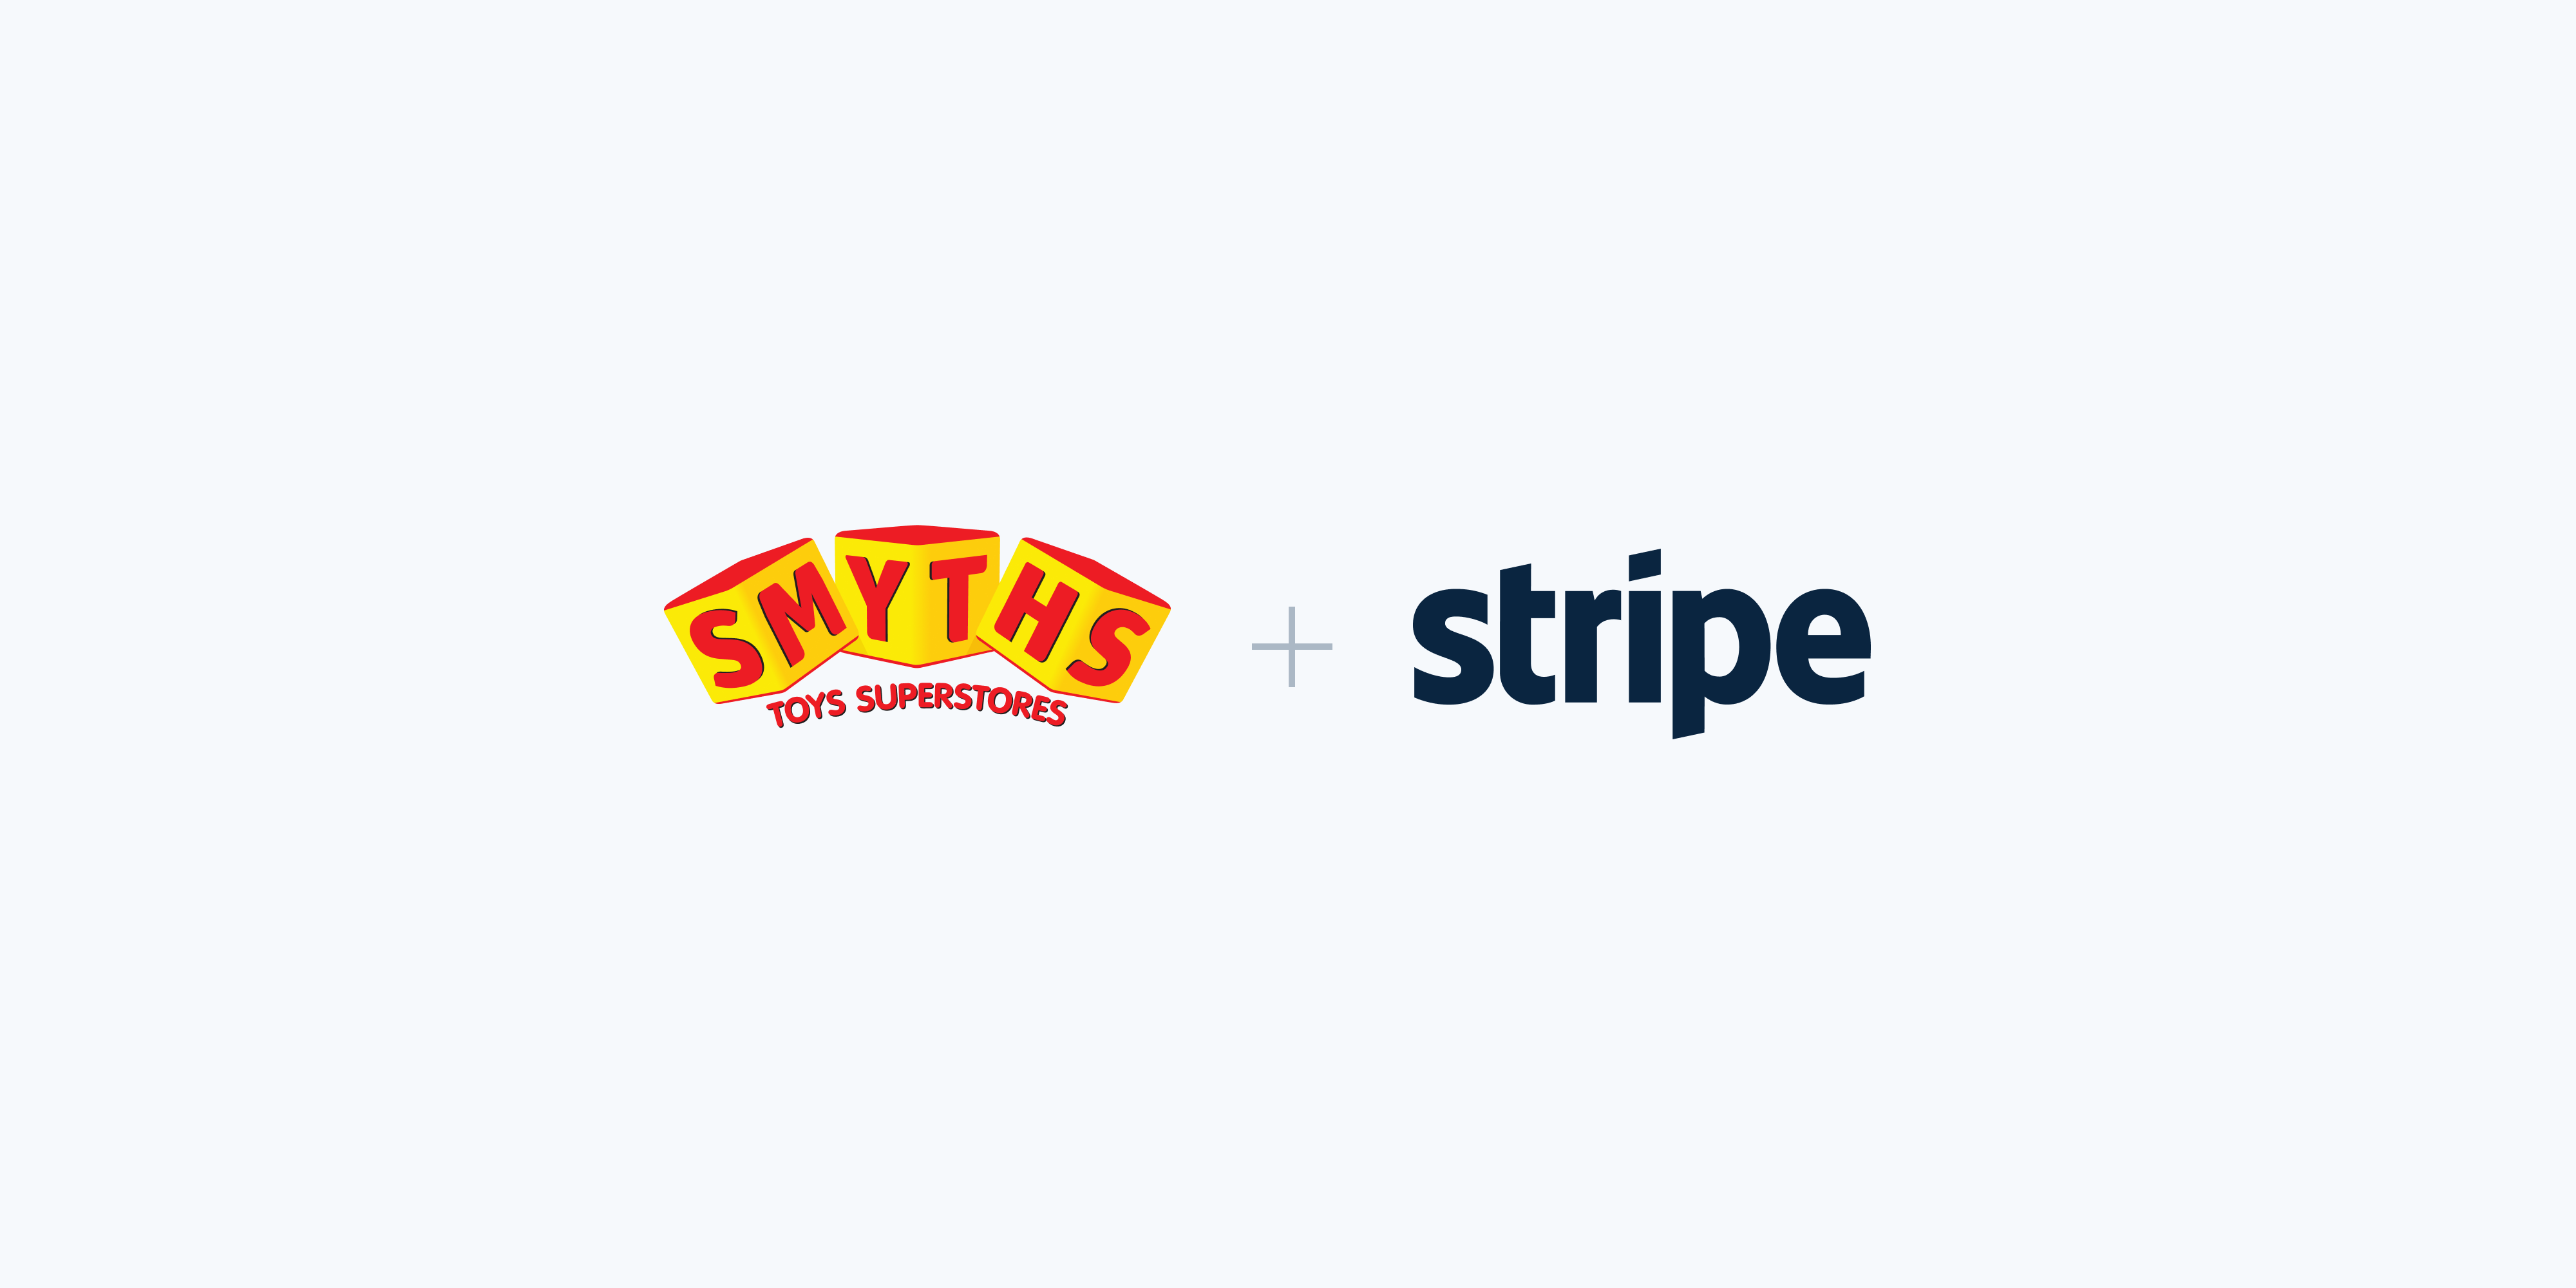 Smyths Toys Superstores selects Stripe as its exclusive online